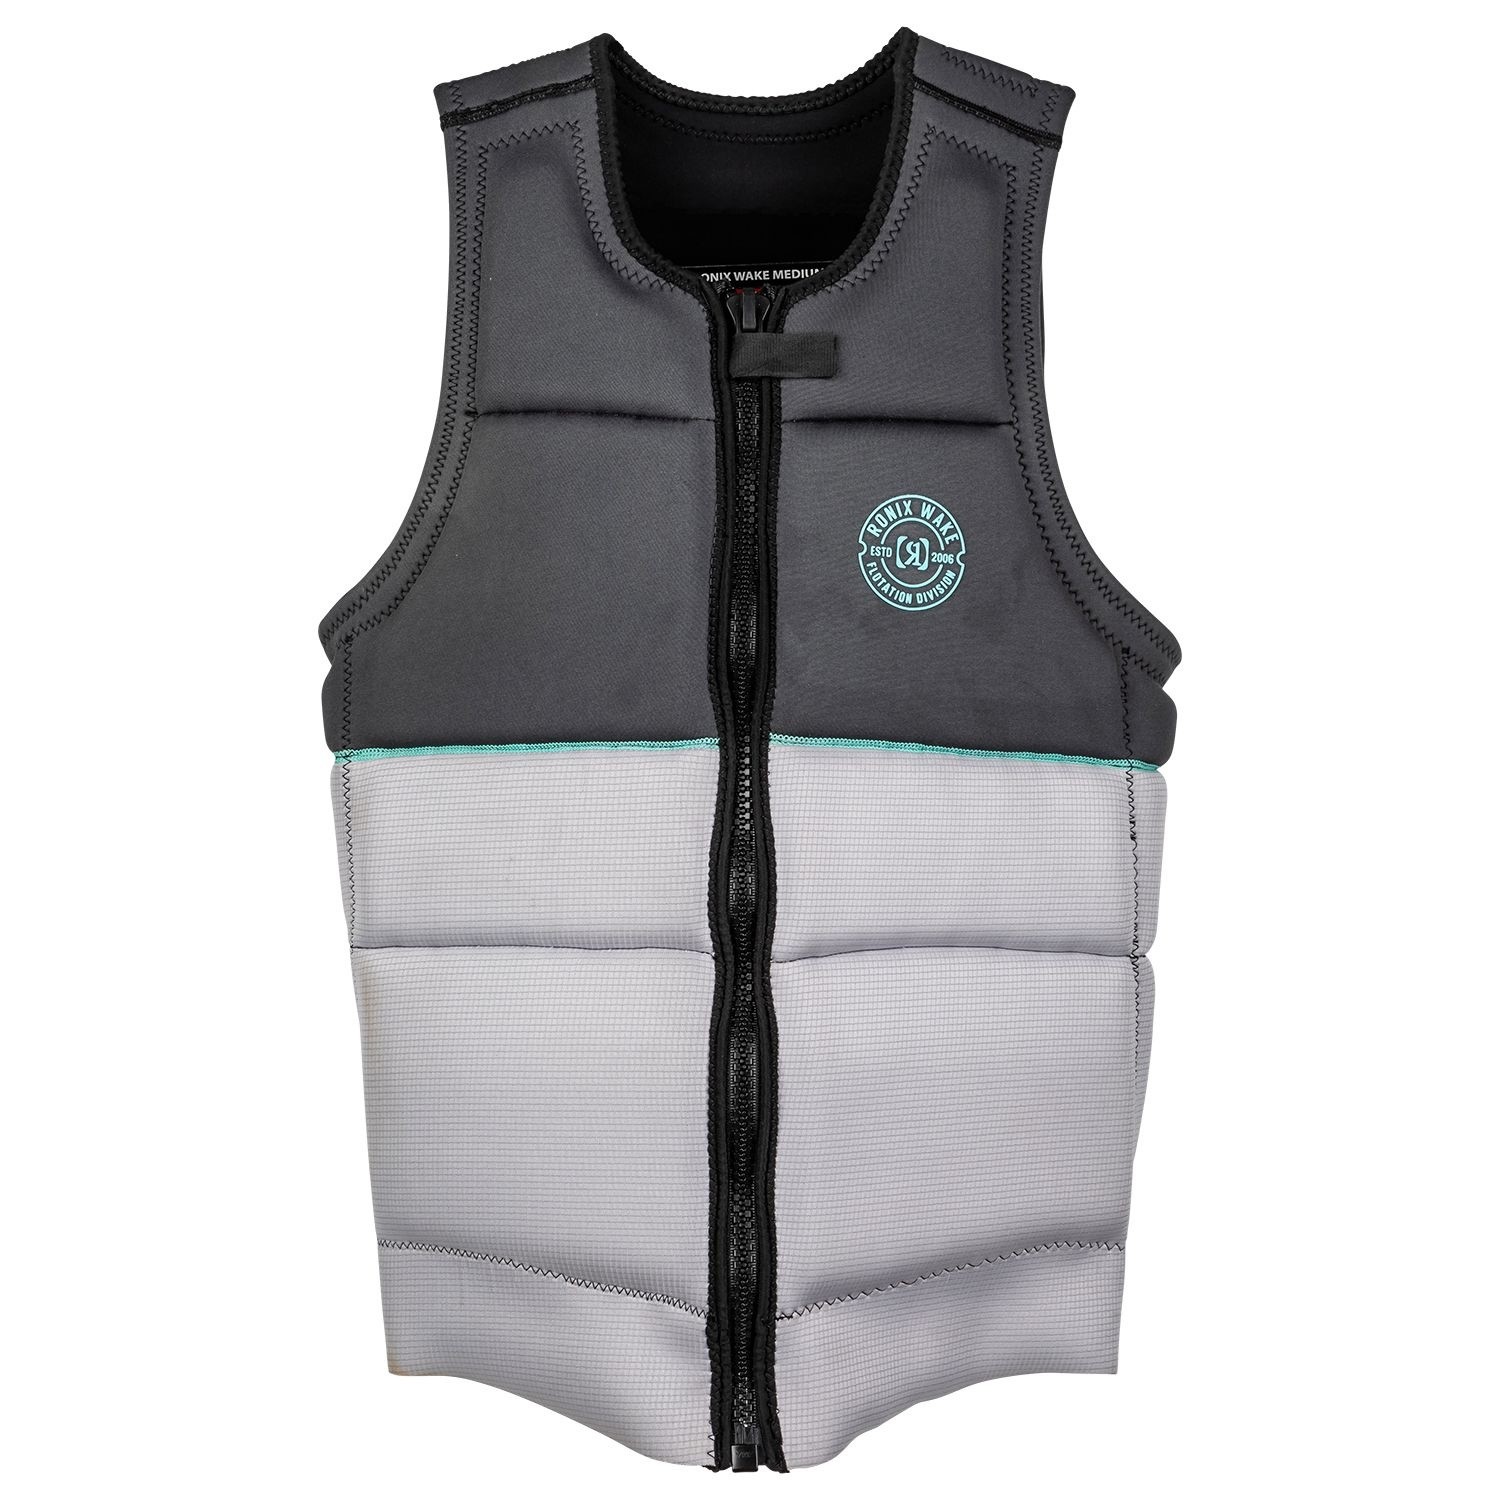 2020 Ronix Supreme Athletic Cut Impact/CE Approved Vest-Grey